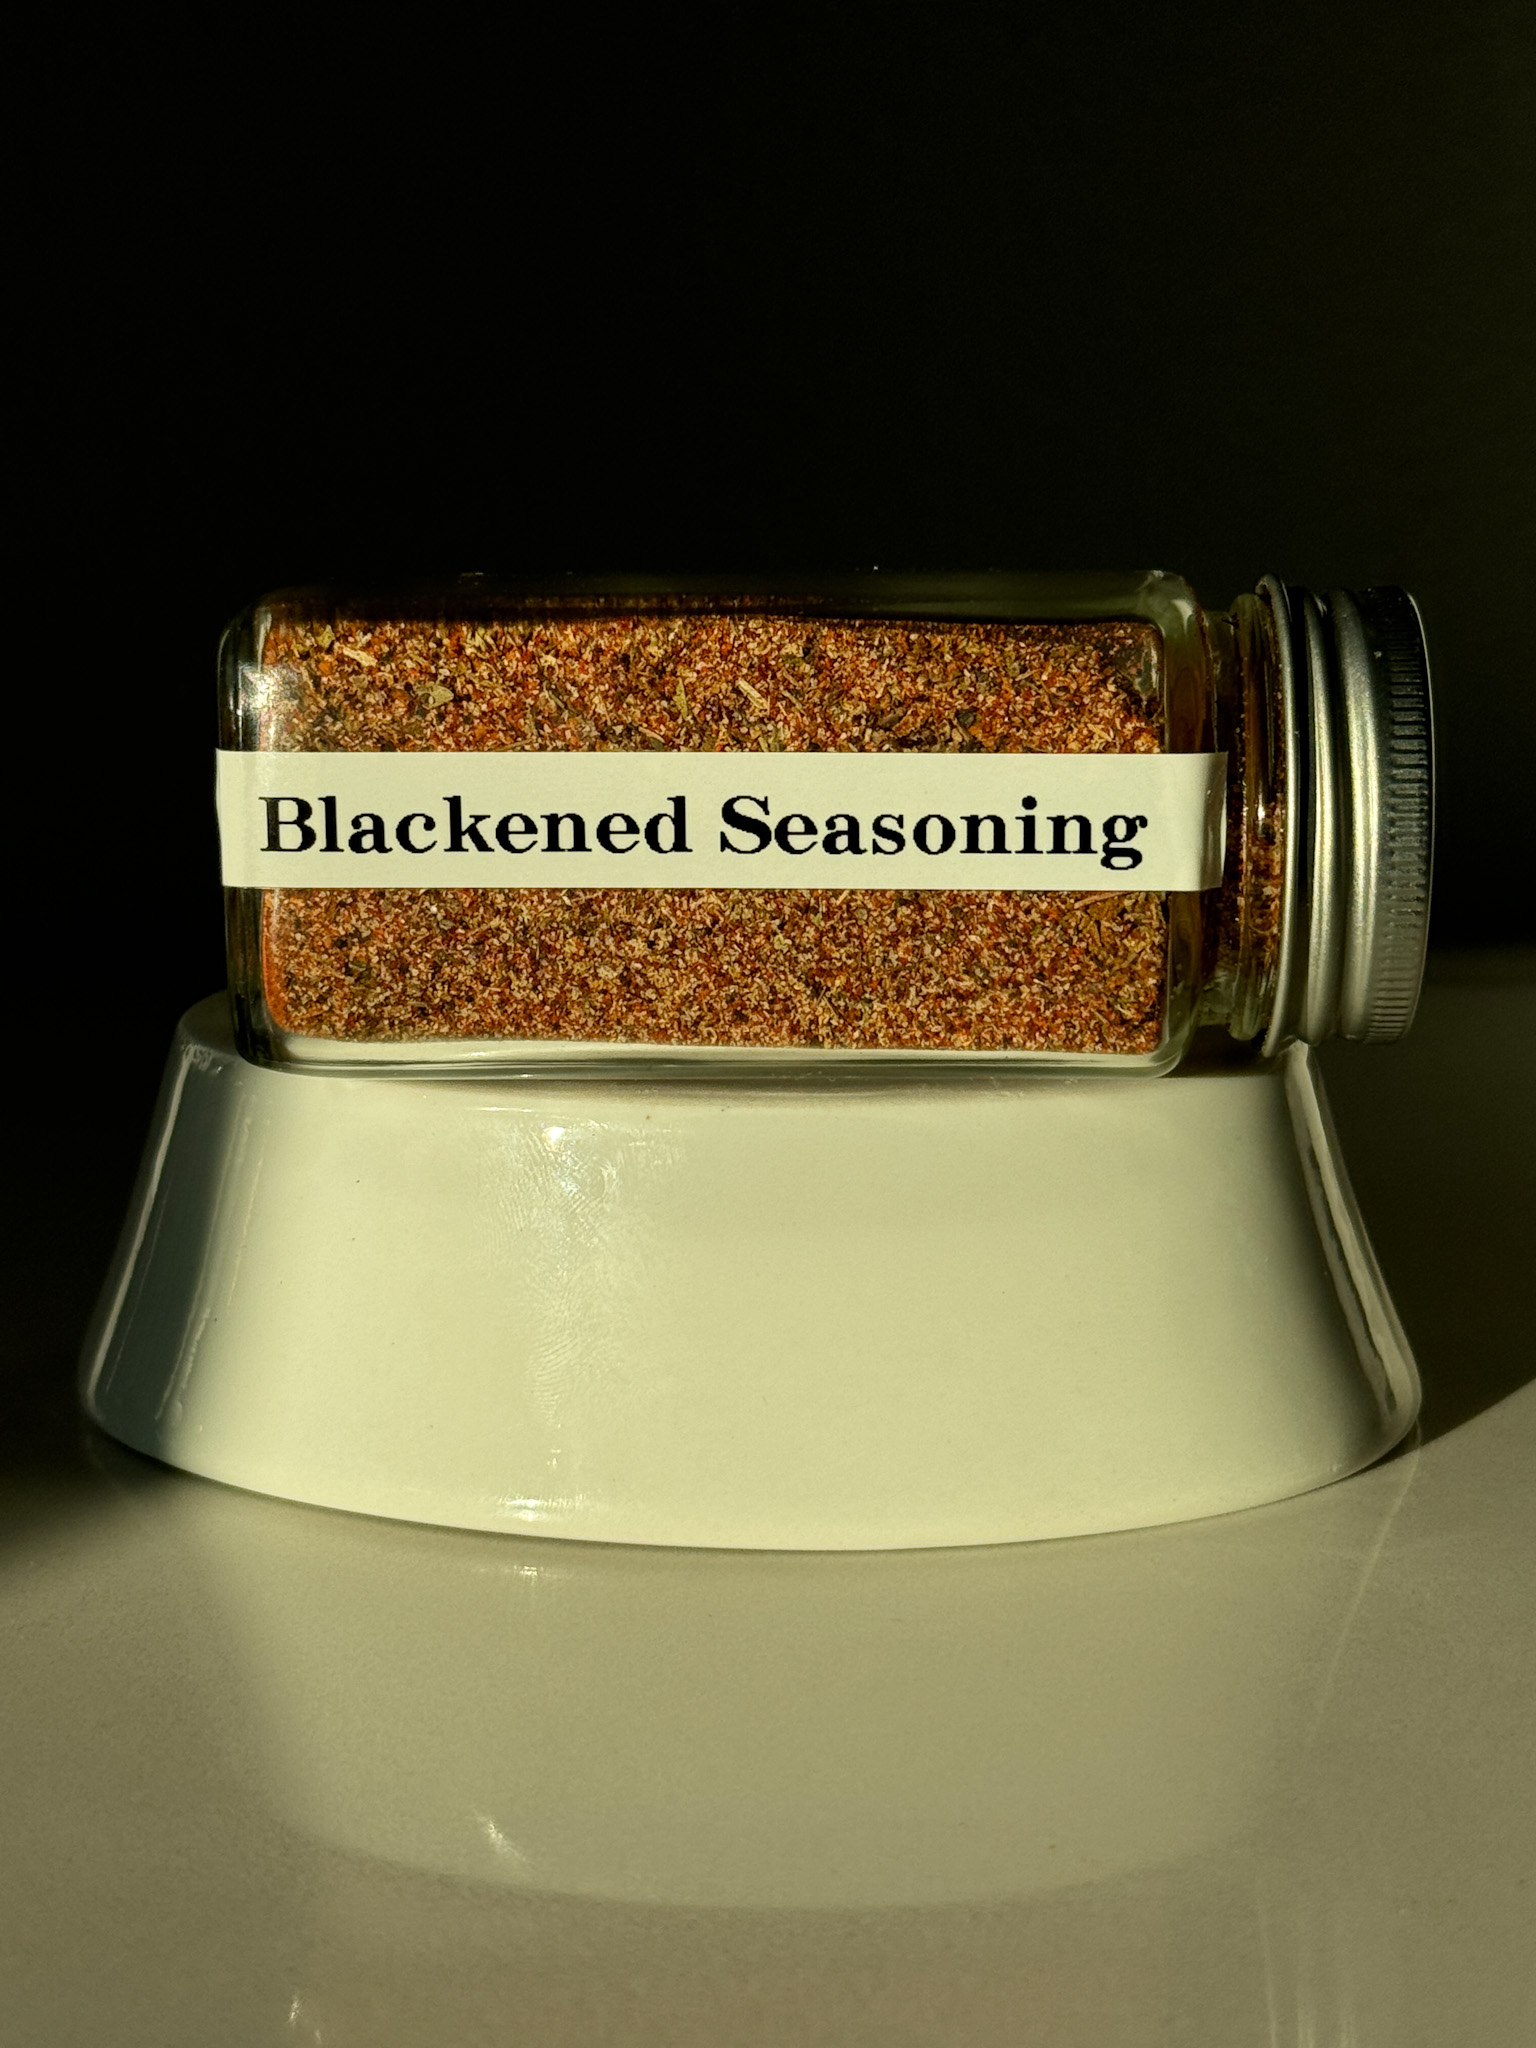 blackened seasoning in a bottle with a label on it